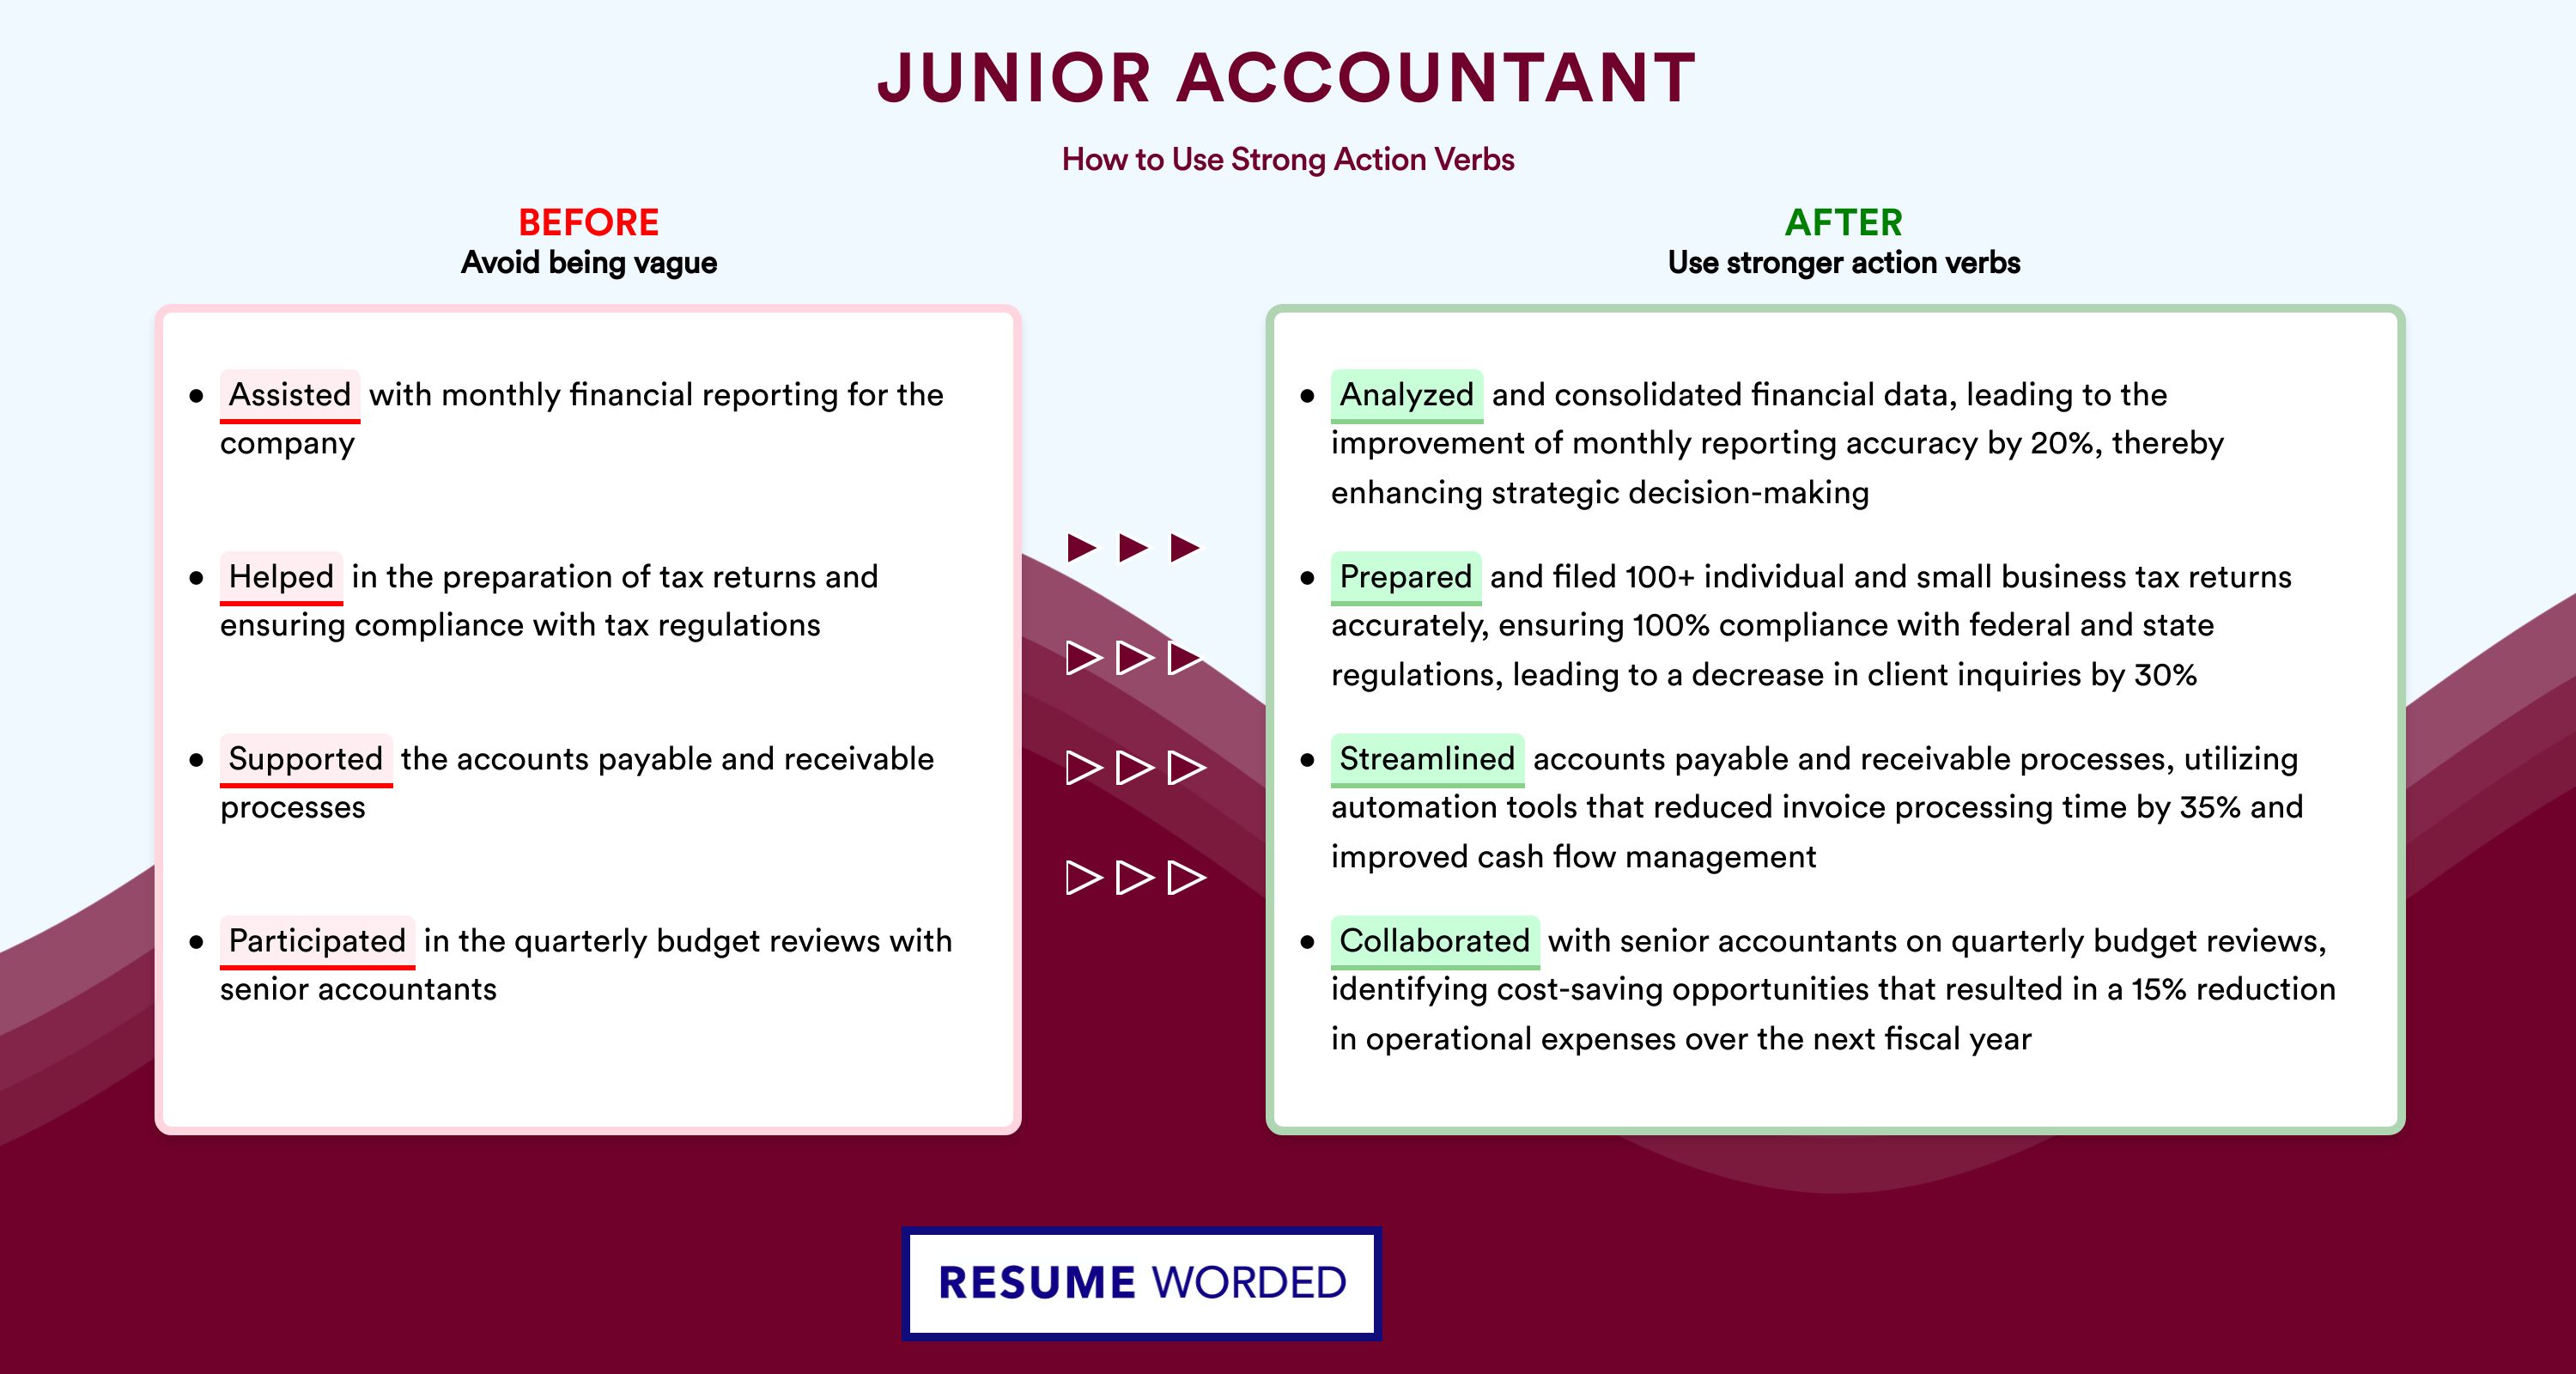 Action Verbs for Junior Accountant